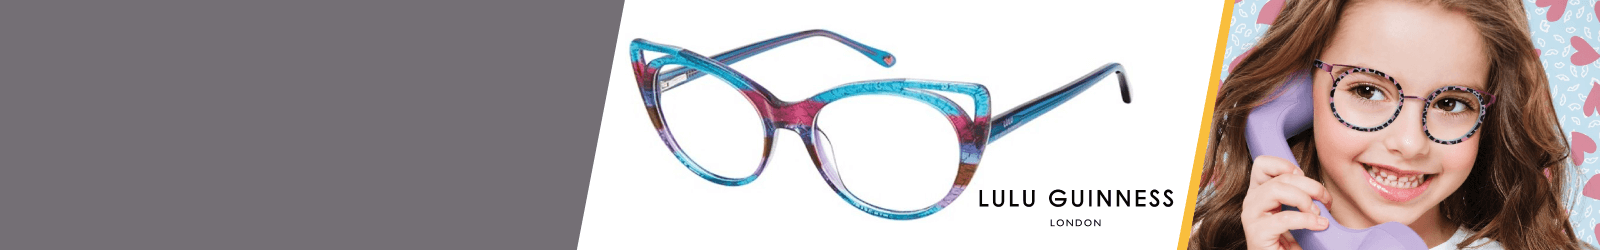 Lulu Guinness Eyewear for Kids from 2 to 4-year-old